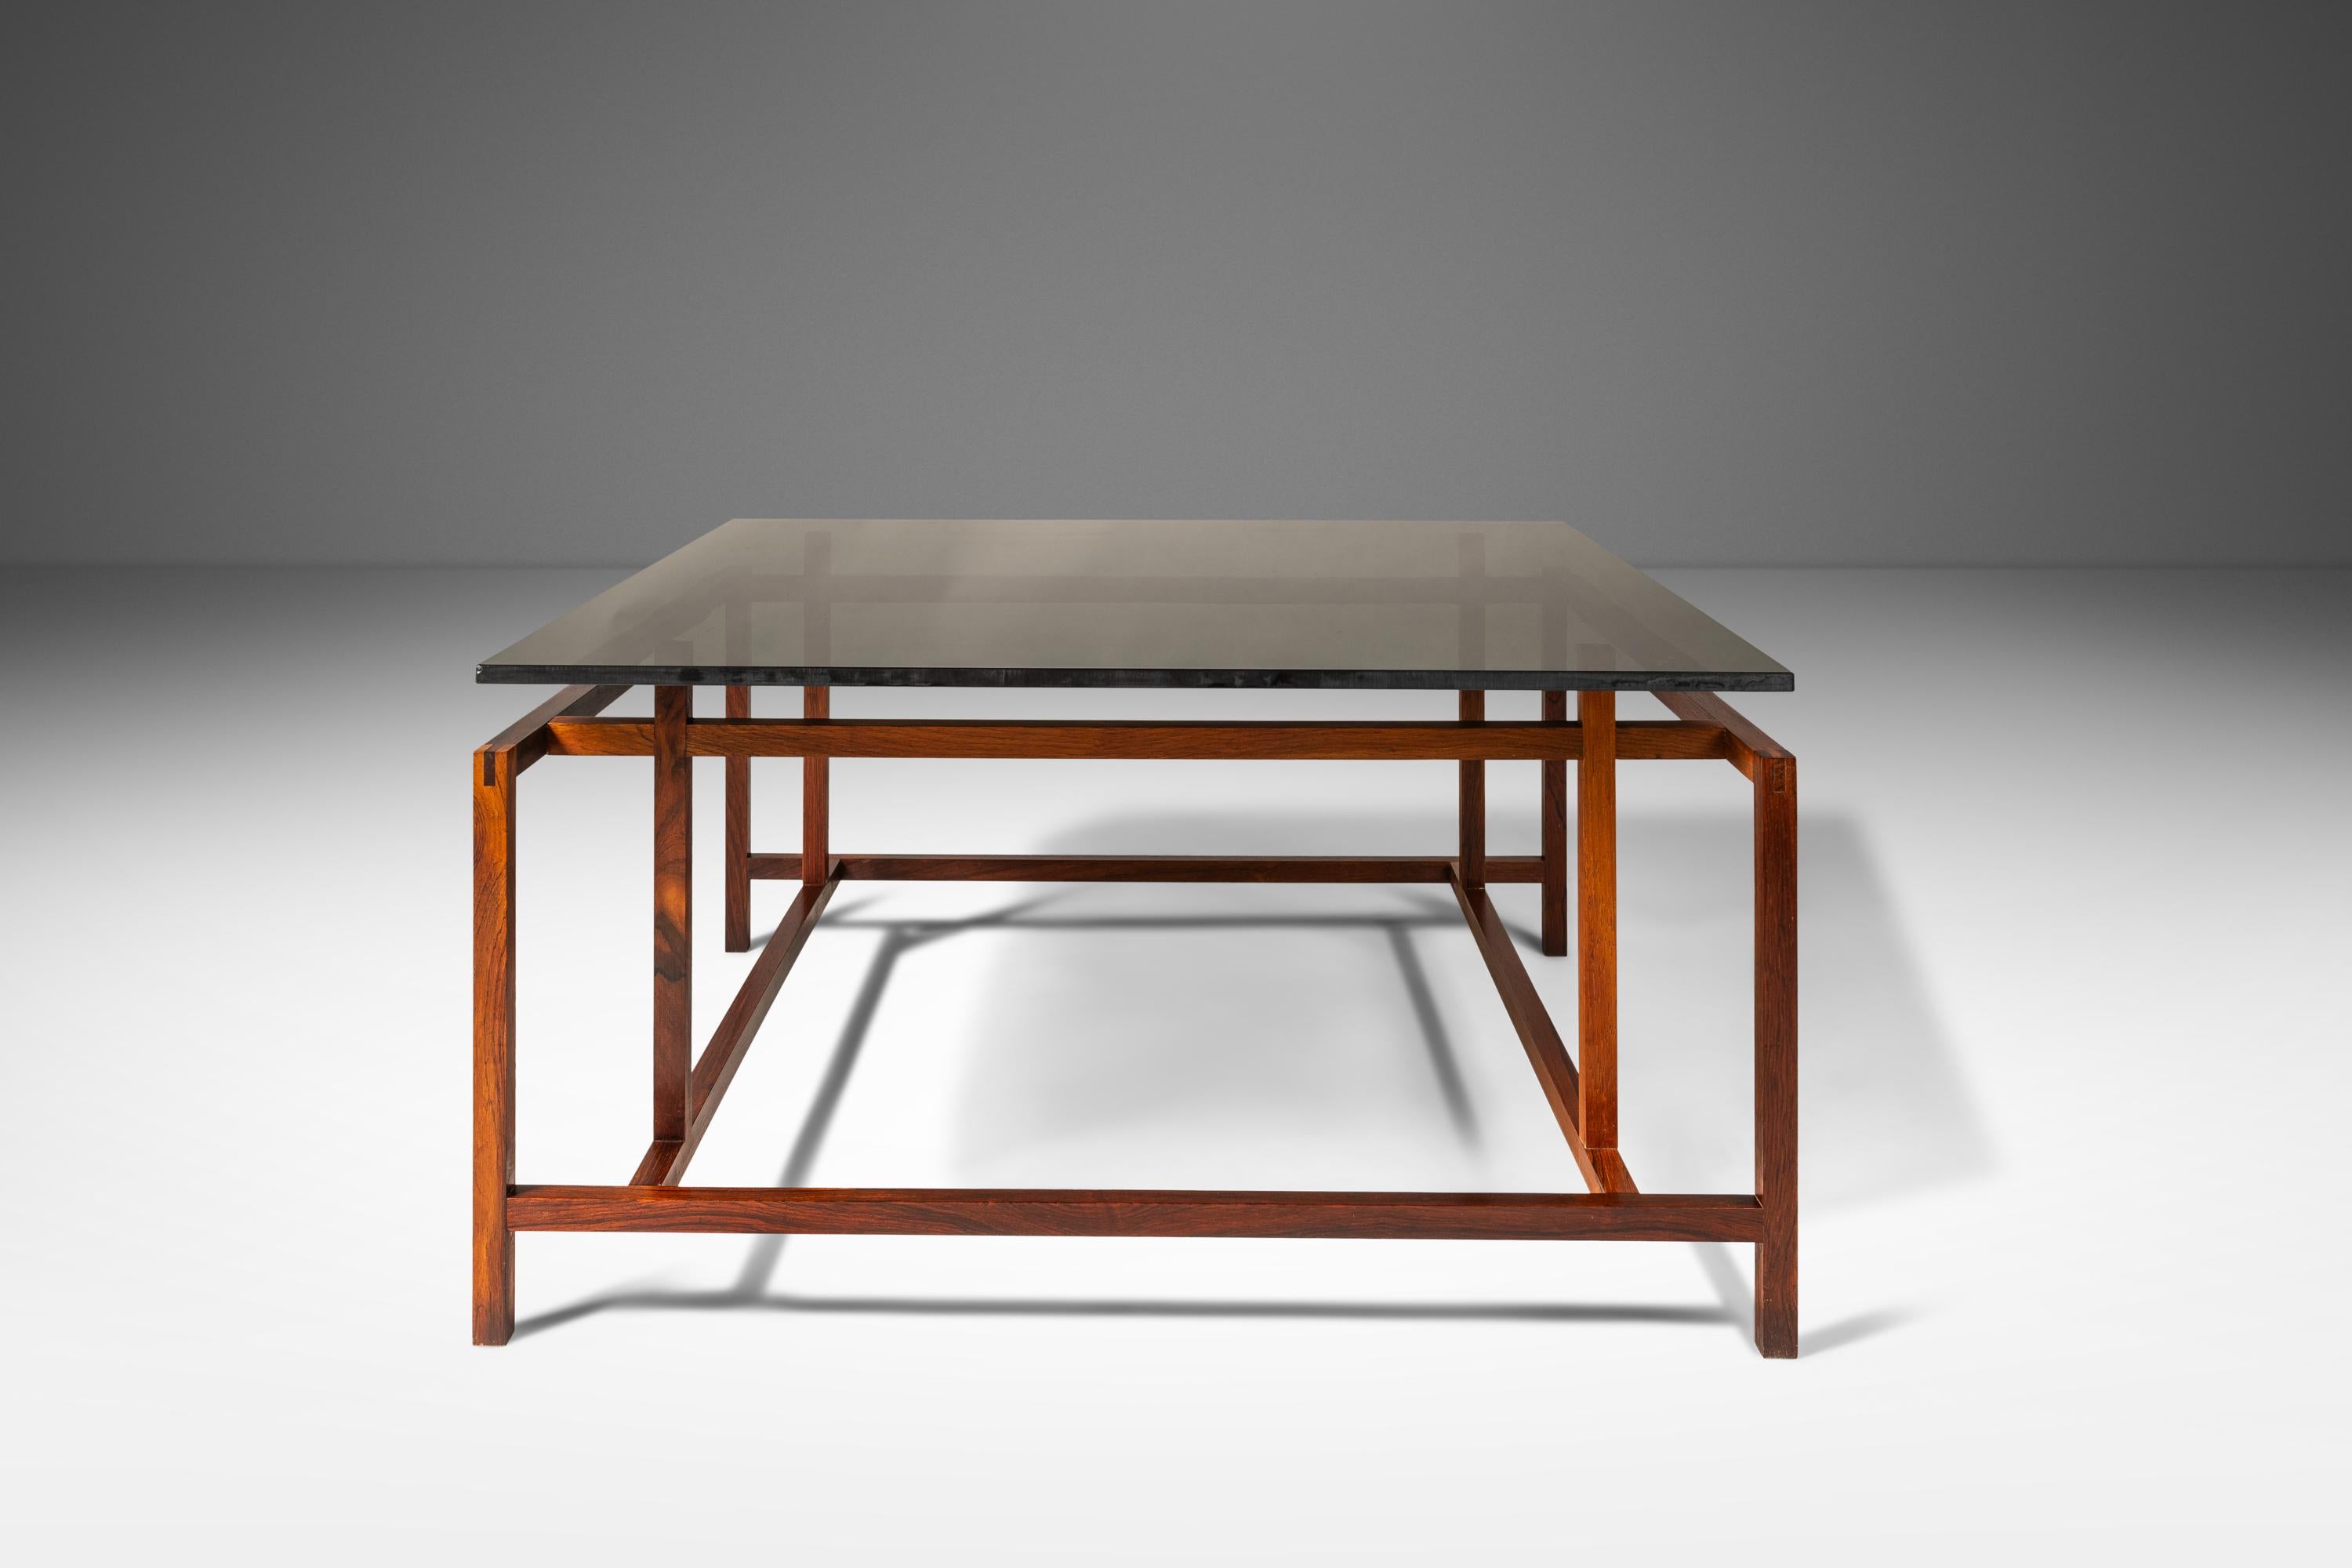  Introducing a rare floating top coffee table designed by Henning Nørgaard for Komfort of Denmark that is as iconic as it is architecturally fascinating. Constructed from solid Brazilian Rosewood the elegantly-designed frame is both simple and